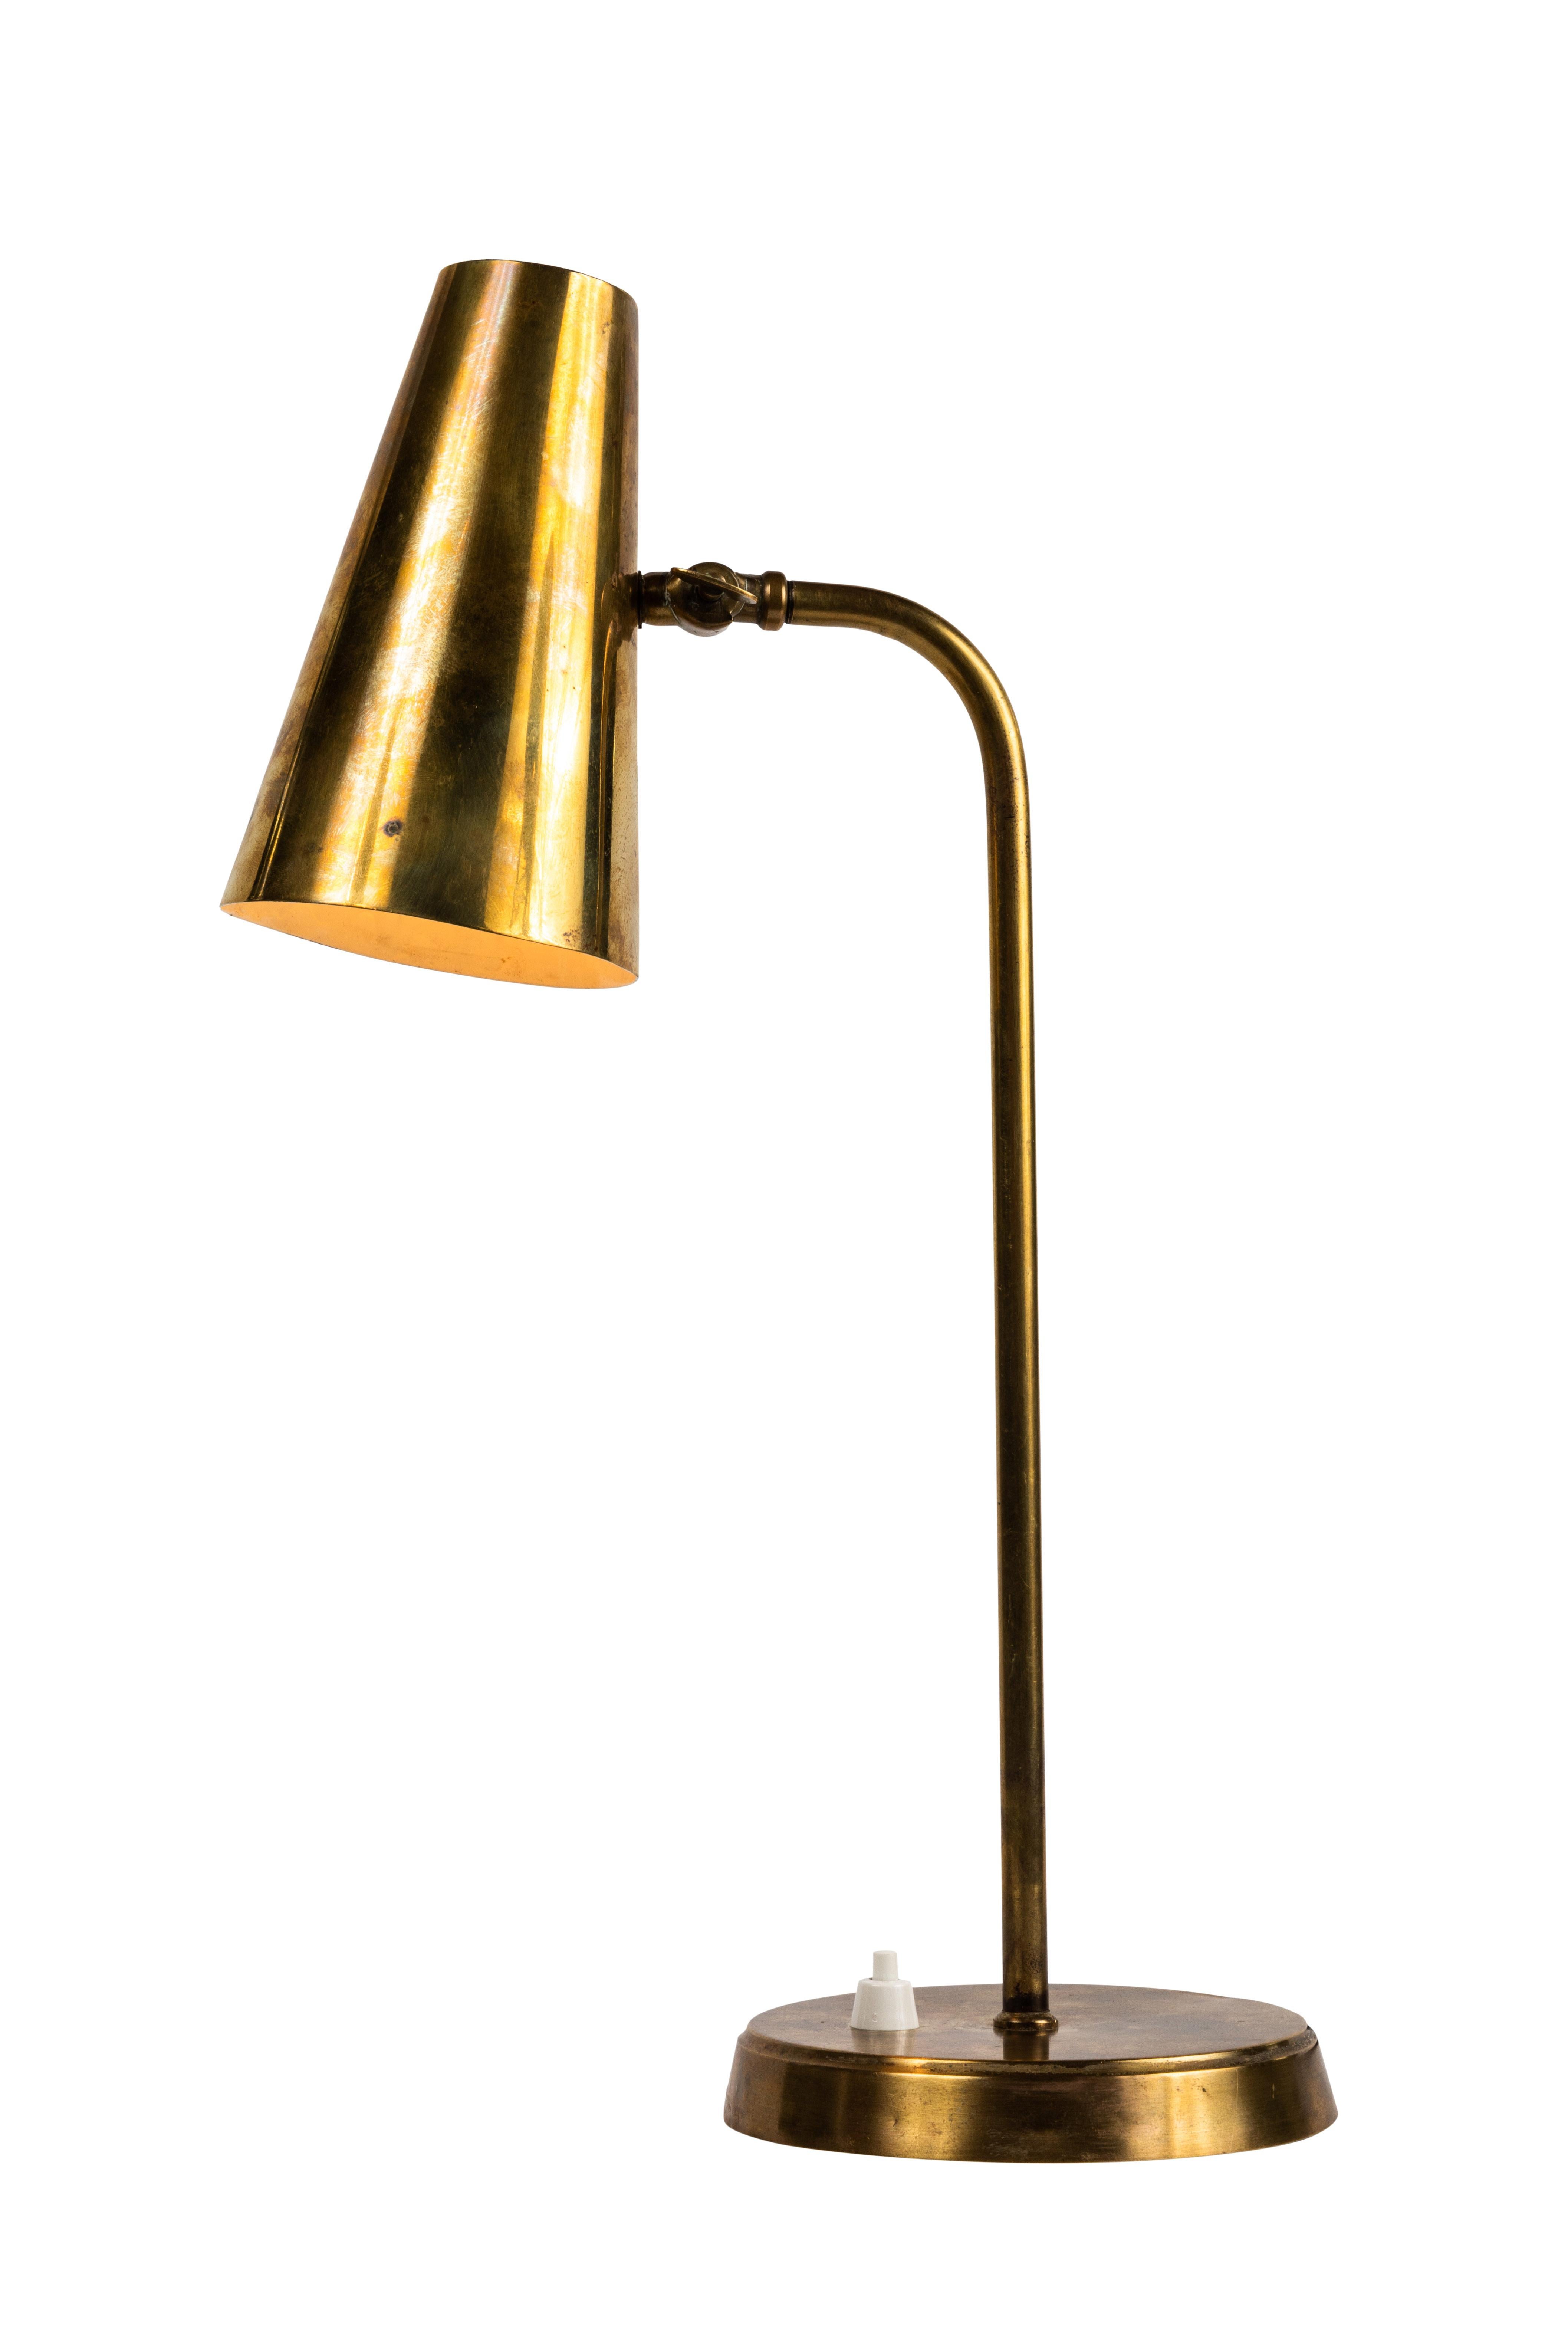 Scandinavian Modern 1950s Finnish Brass Table Lamp in the Manner of Paavo Tynell